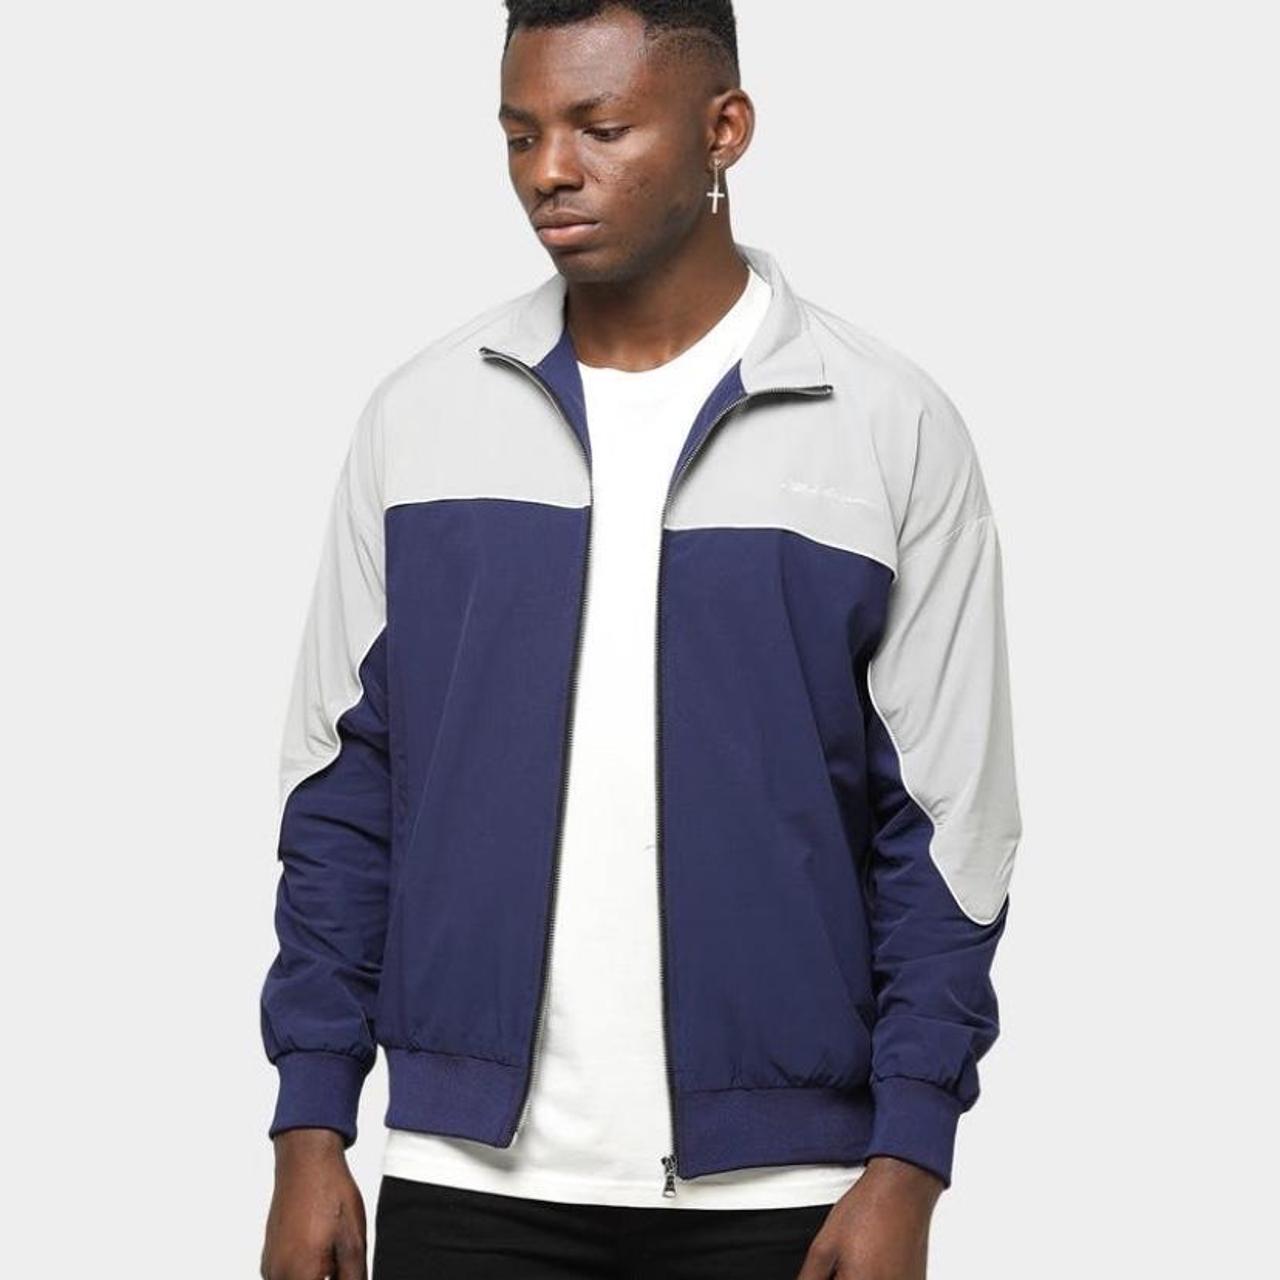 Lifted Anchors Men's Navy and Grey Jacket